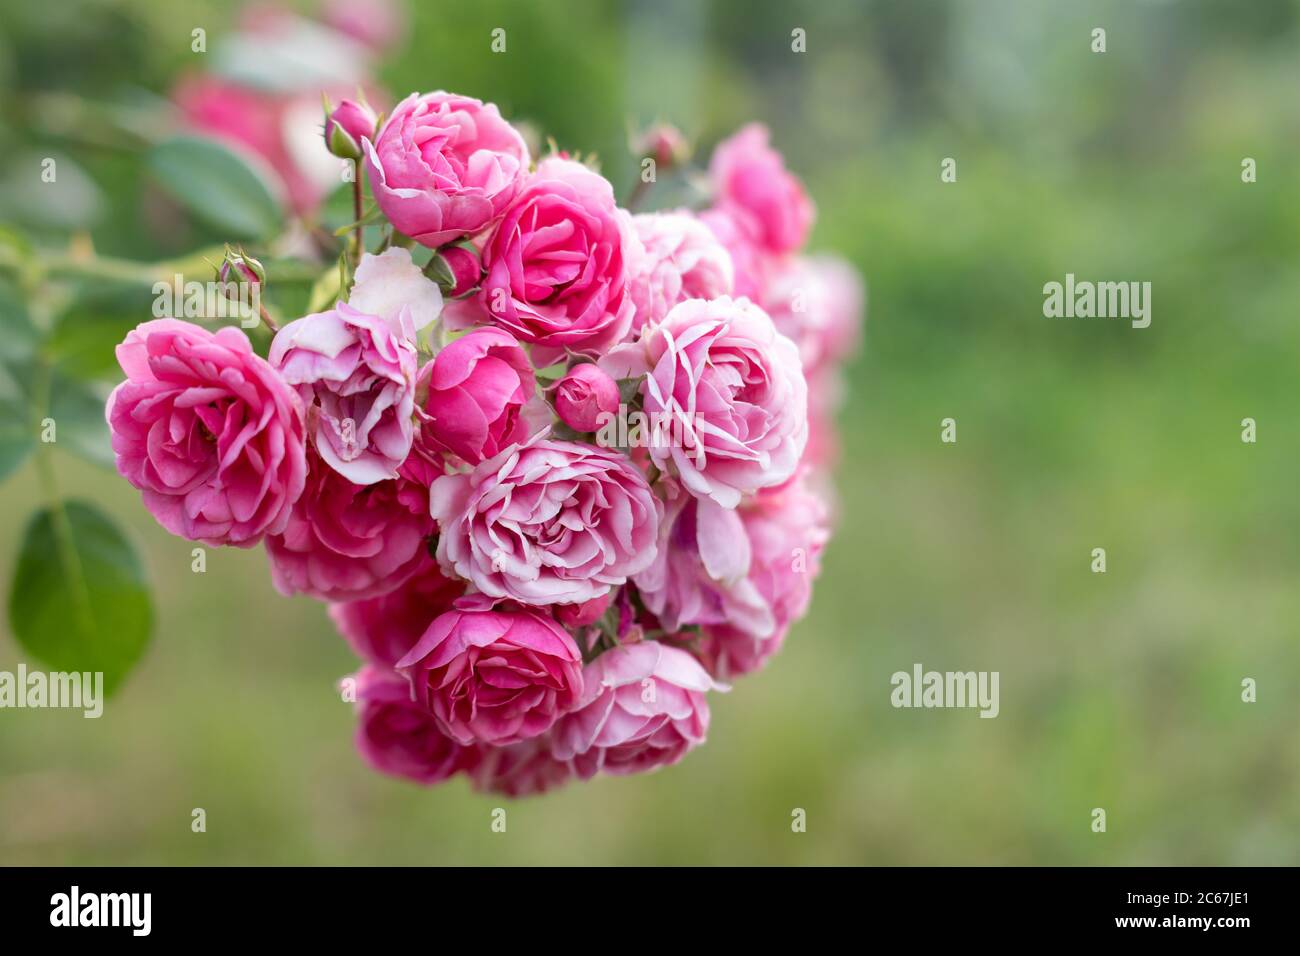 Pink roses in the garden. Blooming climbing roses on the bush. Flowers growing in the garden. Selective focus with copyspace. Stock Photo